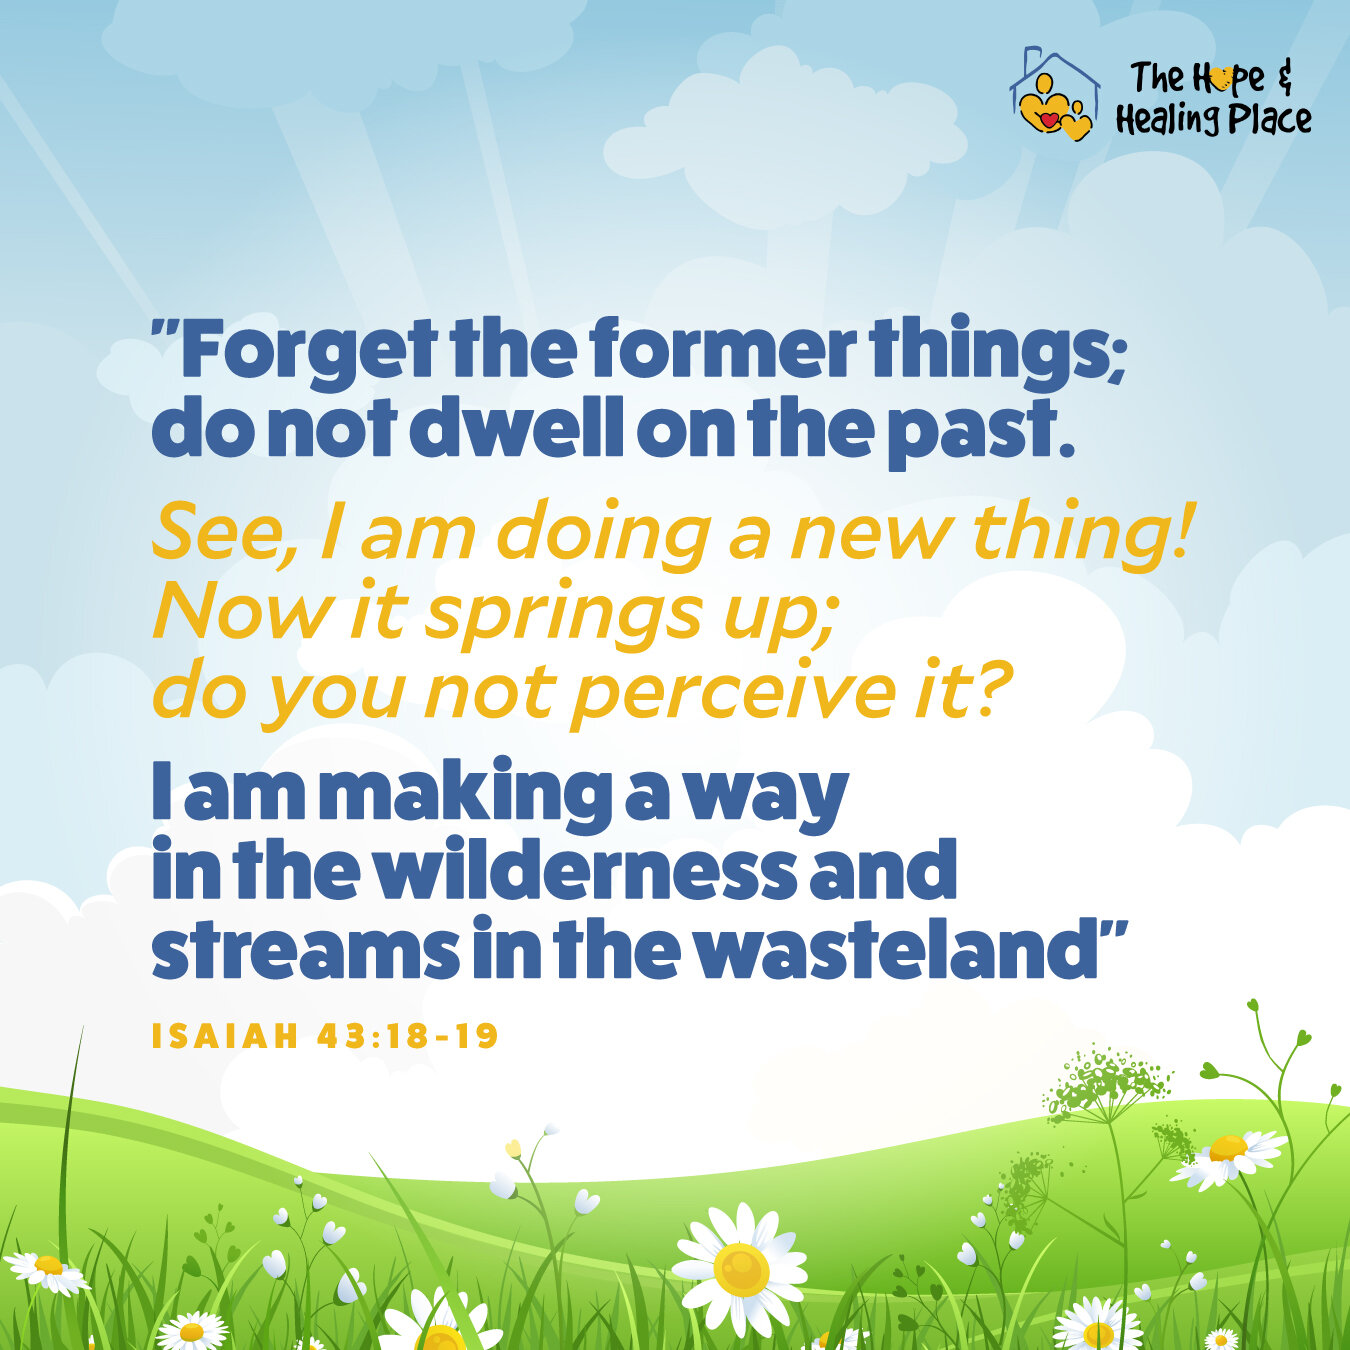 Spring brings the promise of fresh starts, echoing the beauty of God's creation.

The flowers whisper of new beginnings, echoing God's promise of renewal.

God wants to give you the hope of a new beginning. It's like a breath of fresh air, but for yo